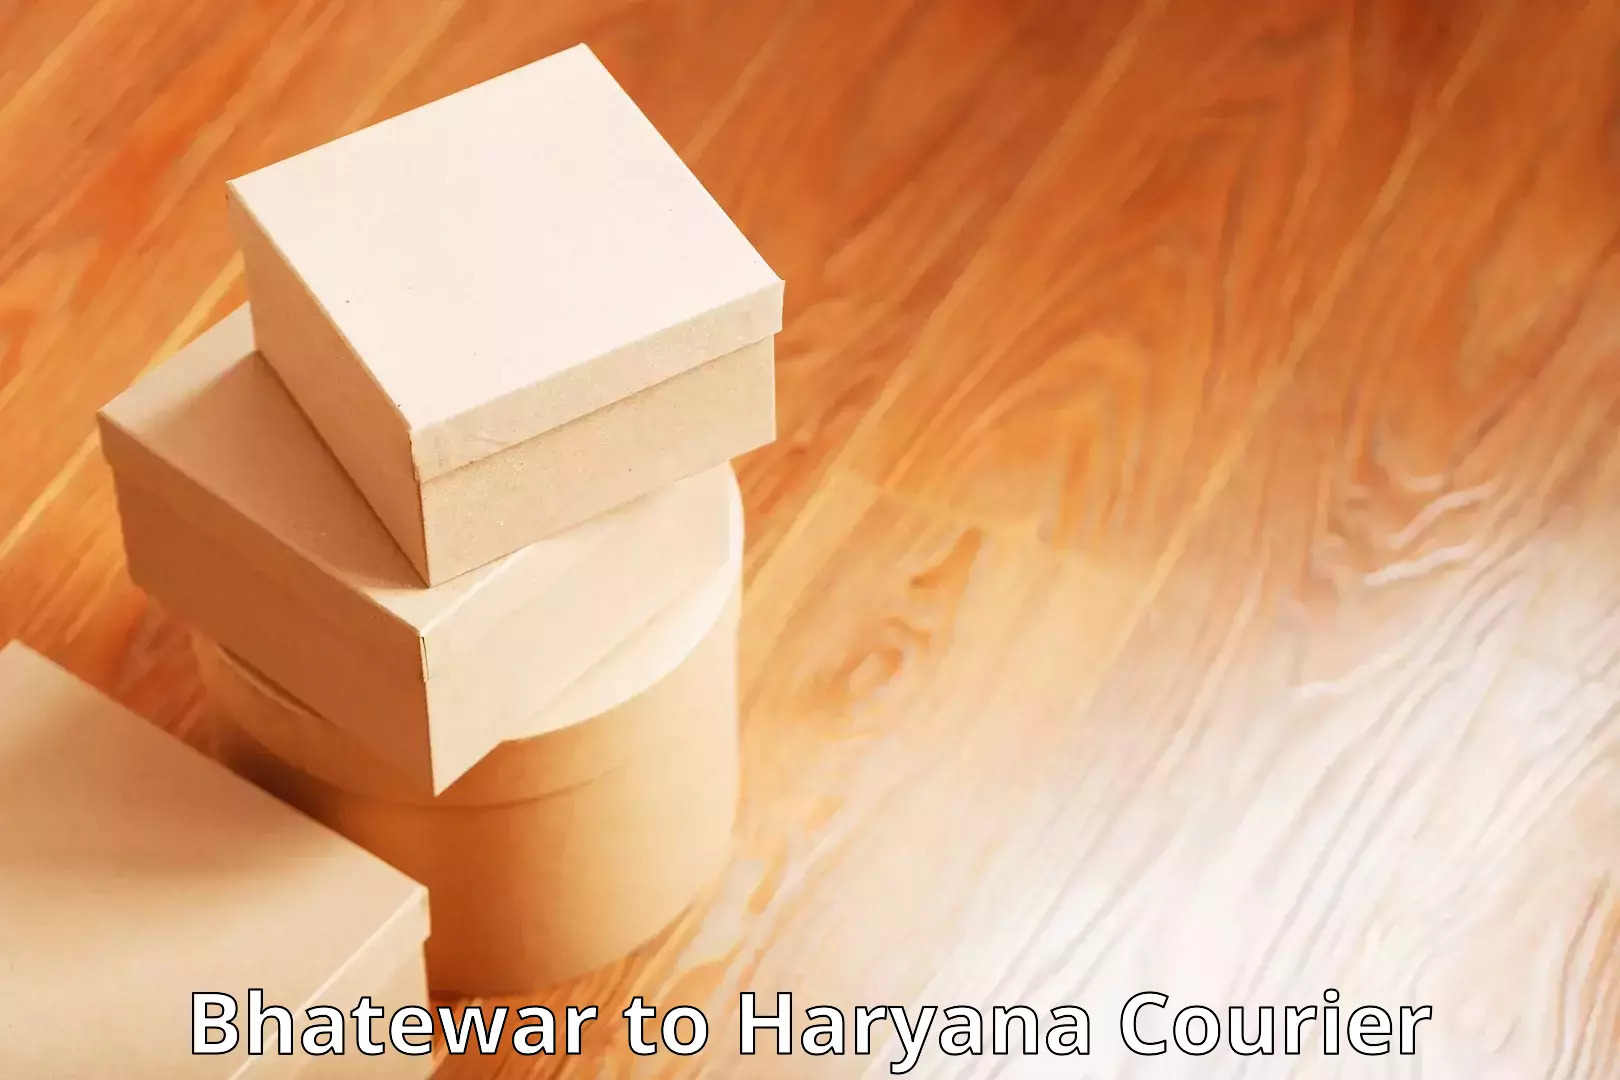 State-of-the-art courier technology Bhatewar to Bilaspur Haryana